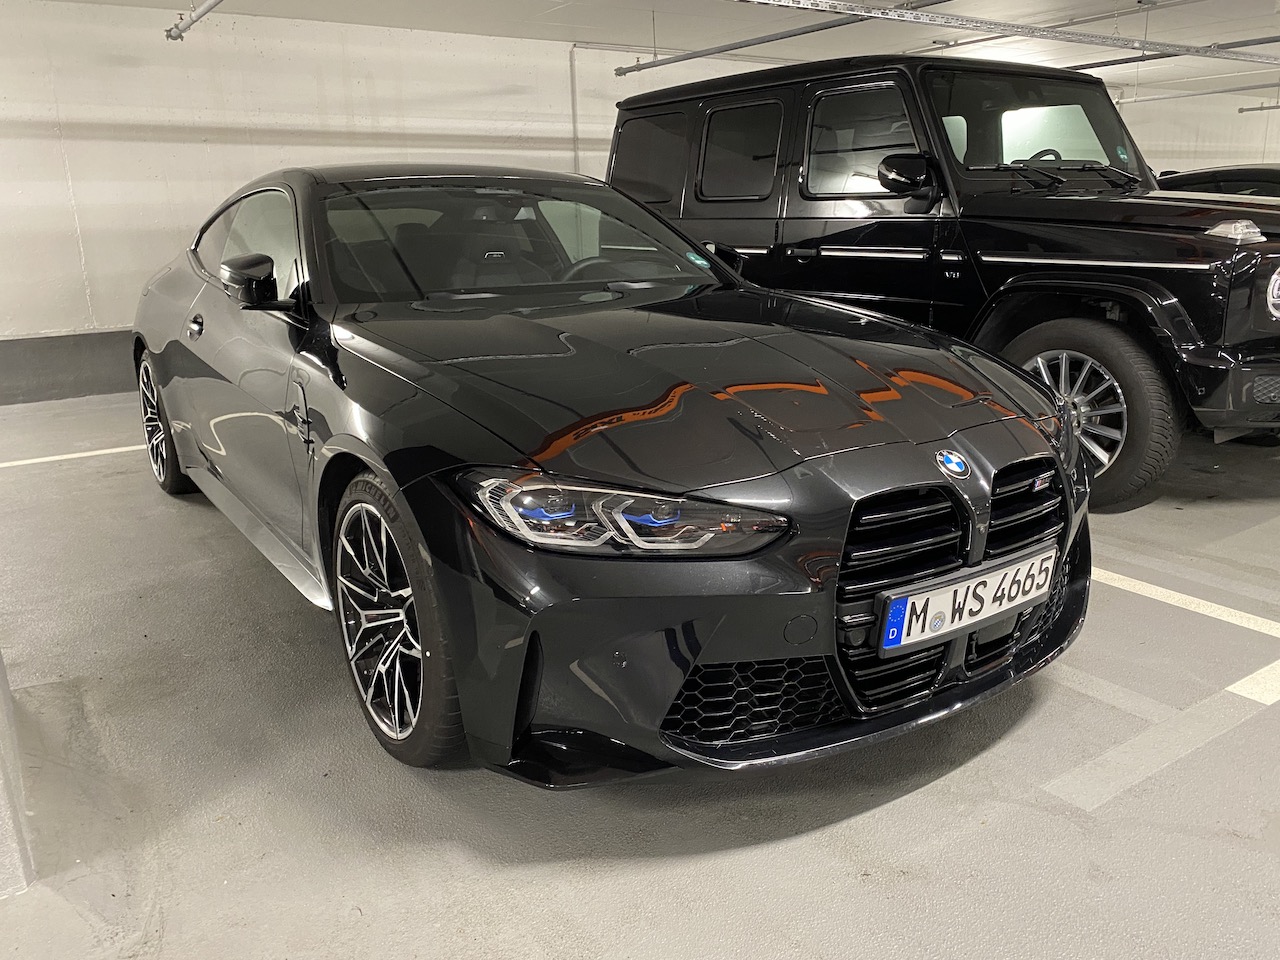 SIXT_M4 Coupe_01.JPG